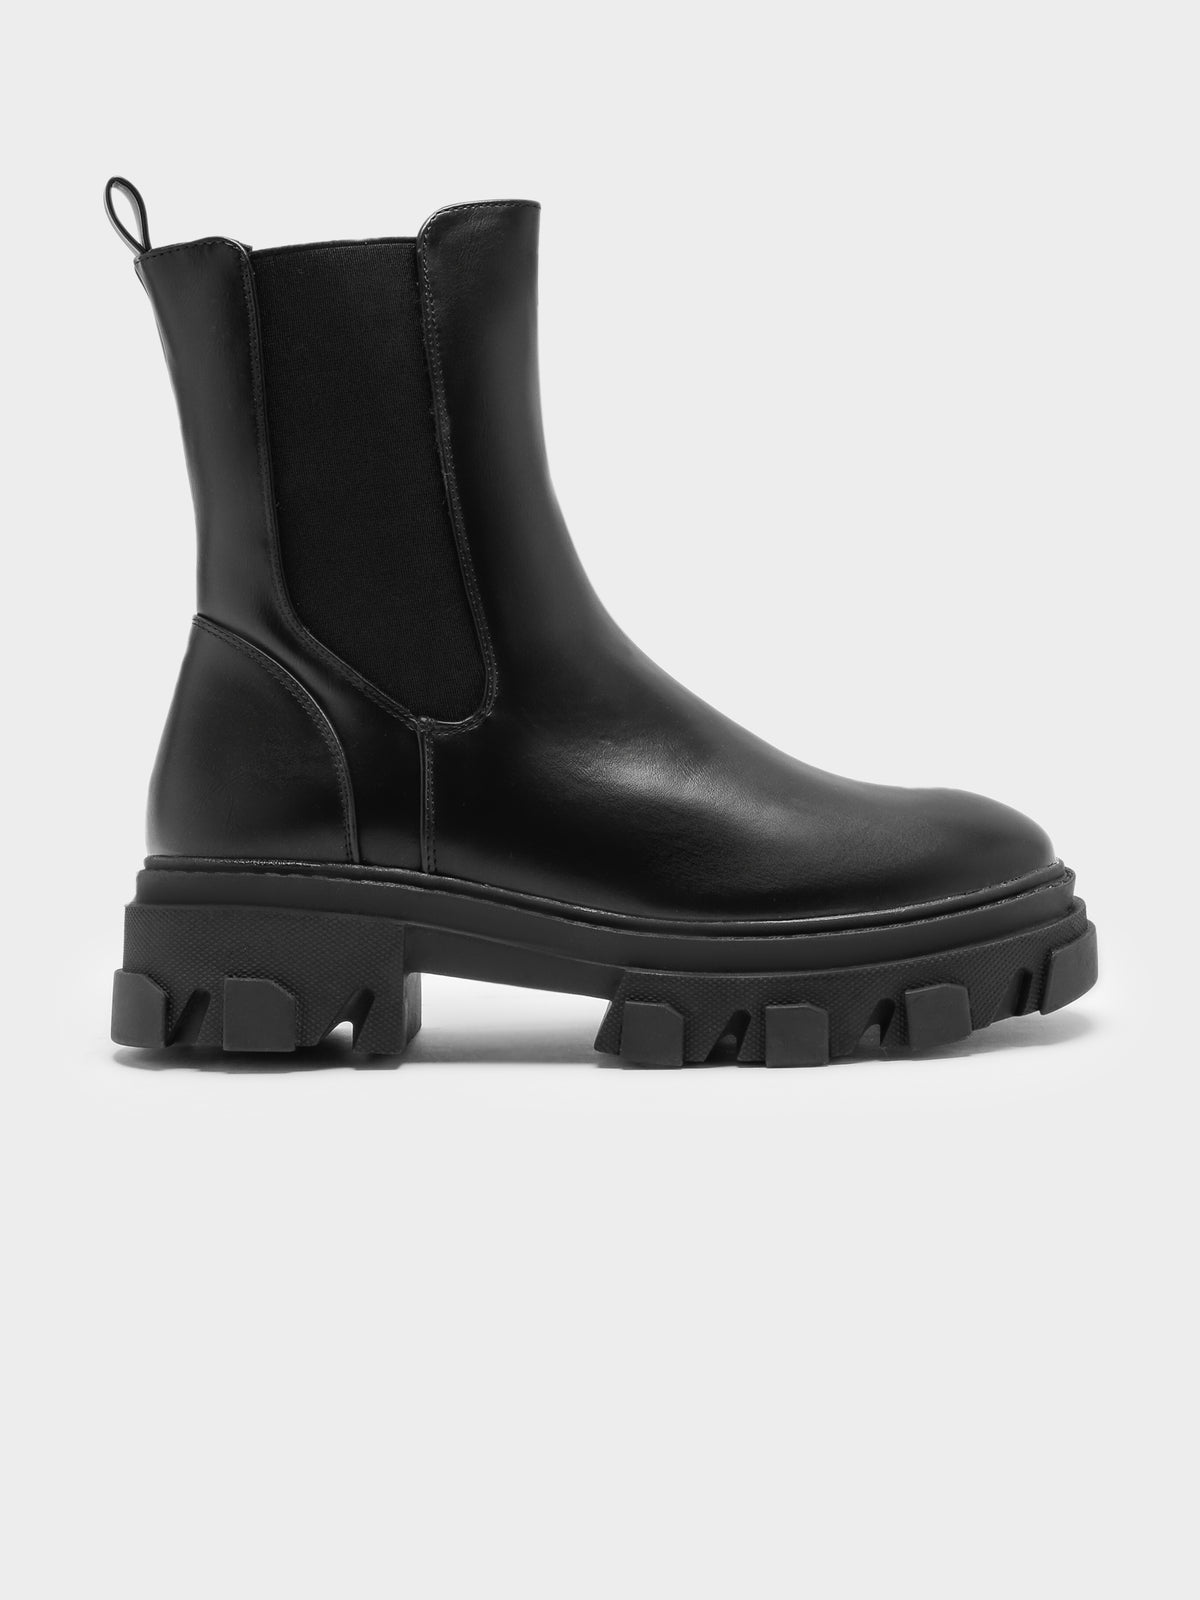 Aspen Boots in Black Faux Leather